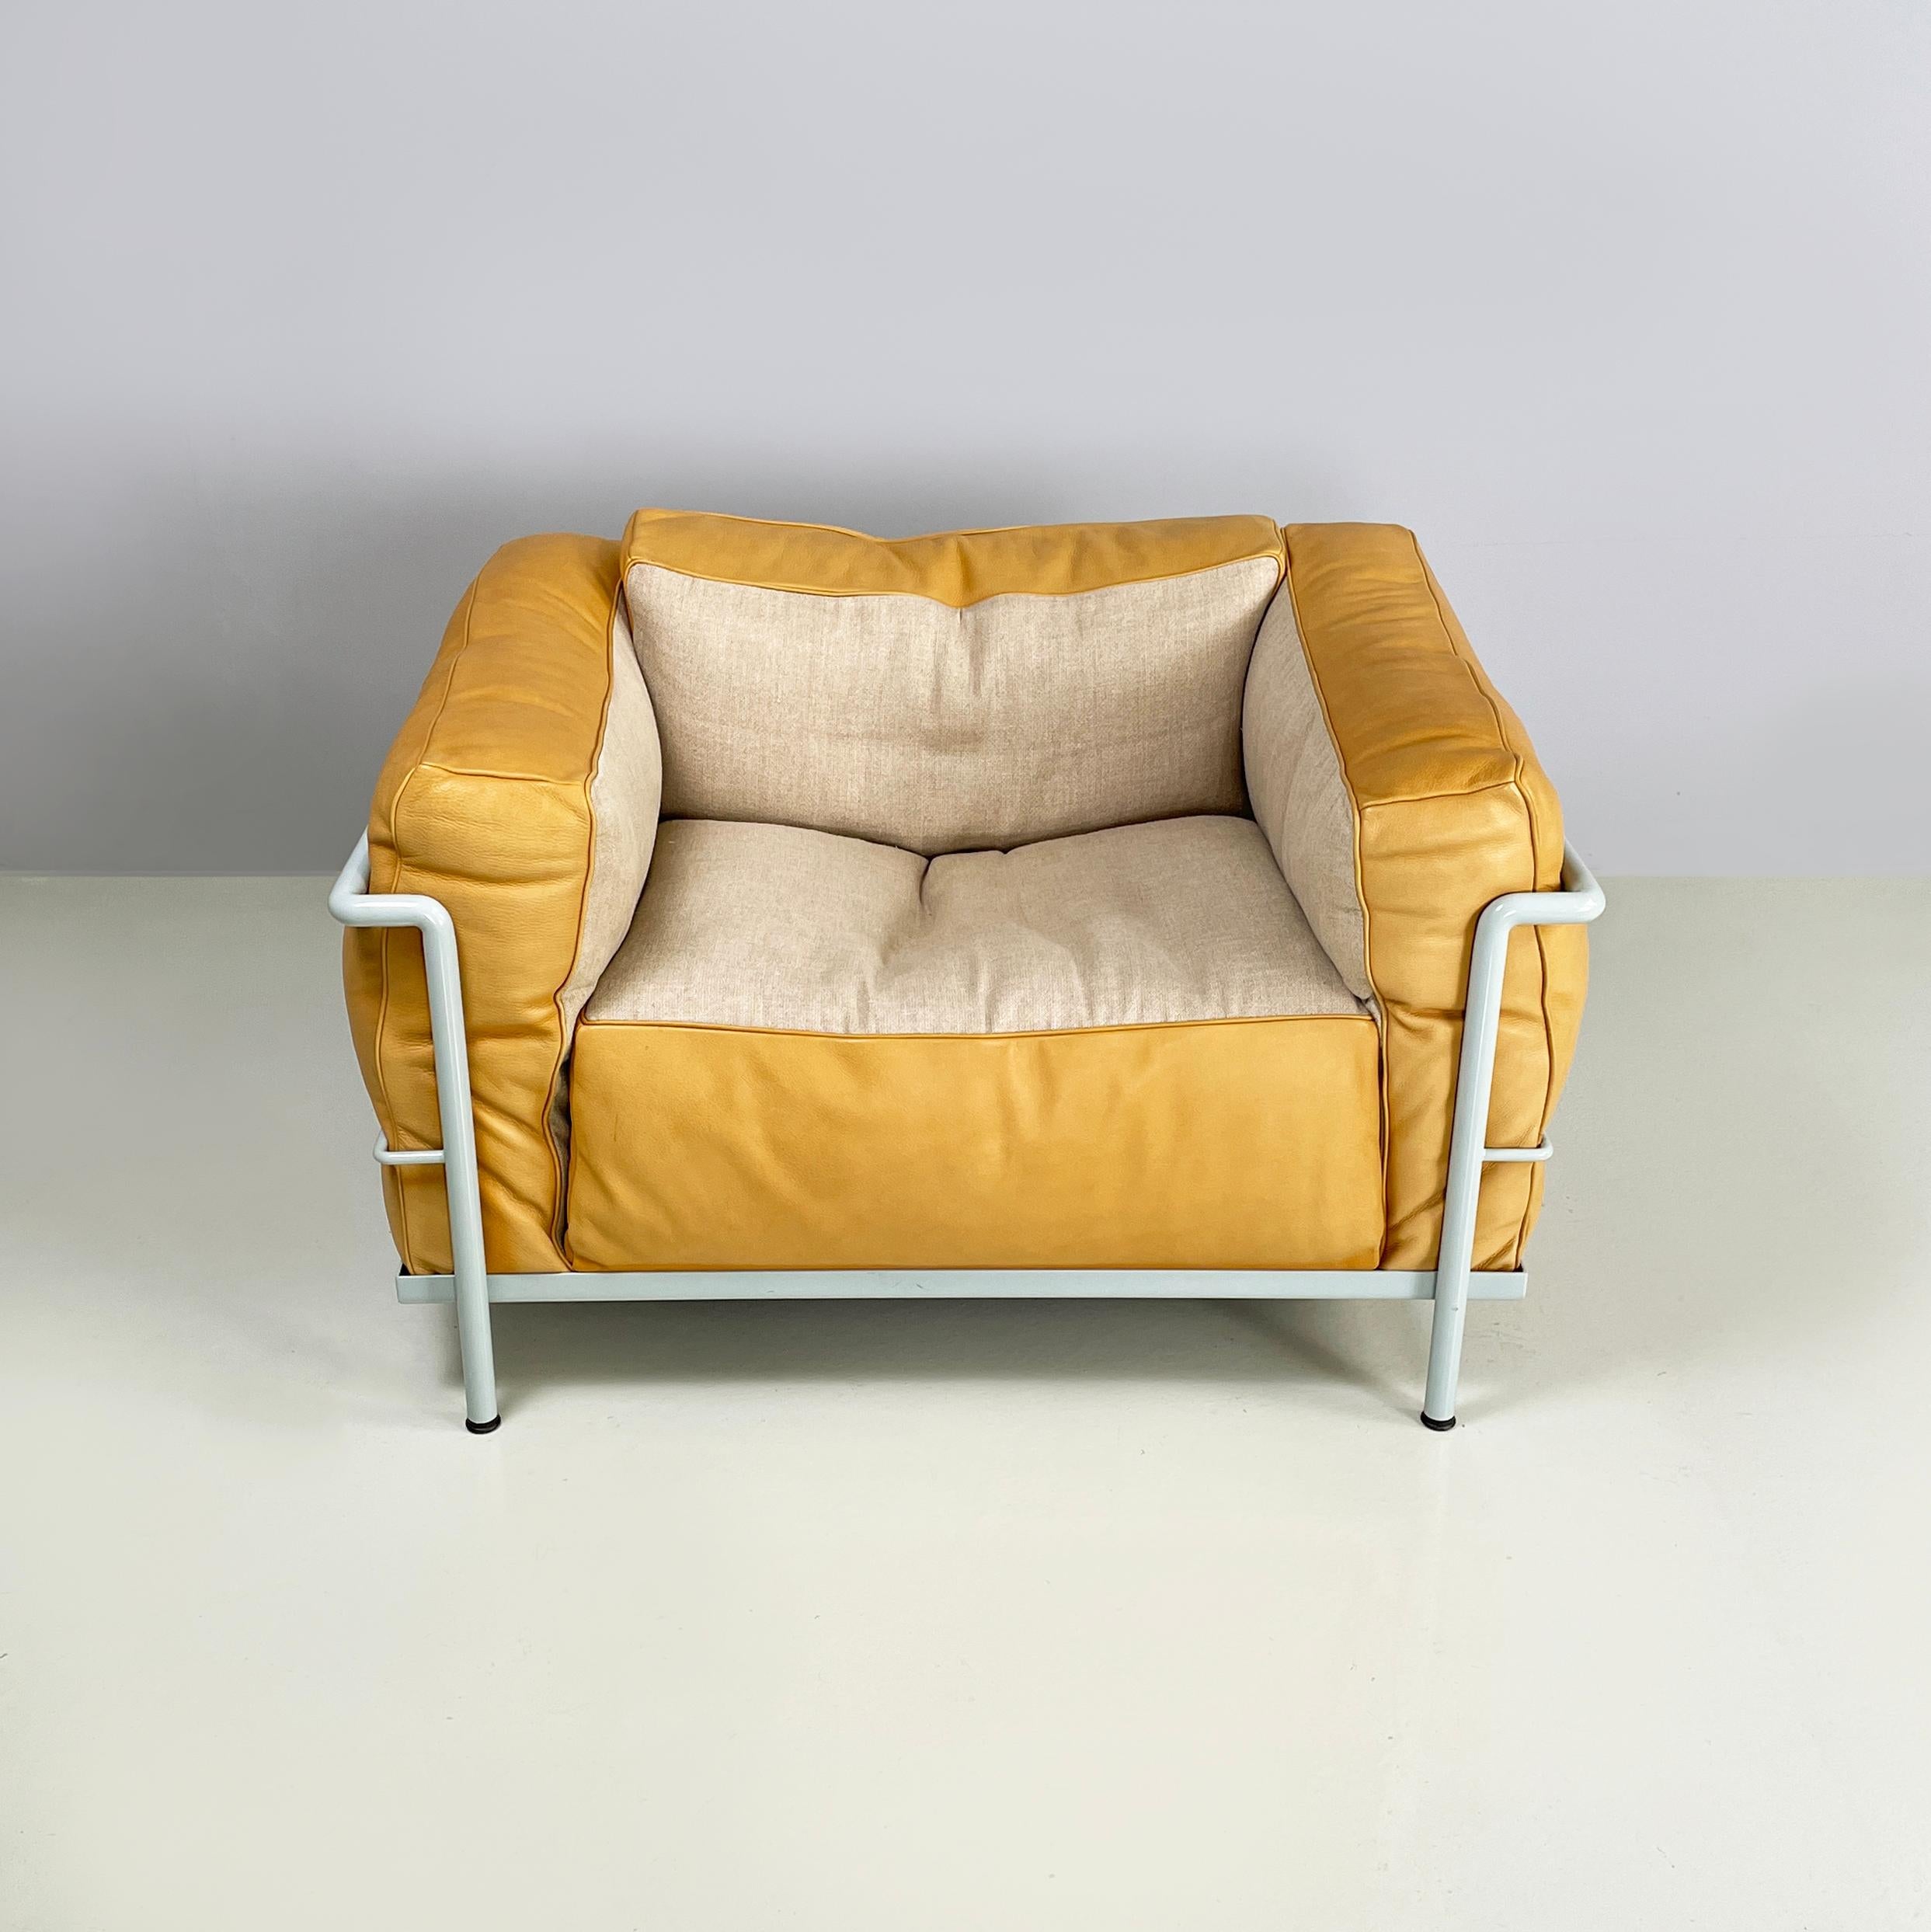 Italian modern Armchair LC3 by Le Corbusier, Jeanneret and Perriand for Cassina, 2008
Elegant armchair mod. LC3 with tubular metal structure painted in pale blue. The square  seat, the backrest and the armrests are padded and covered in bright beige